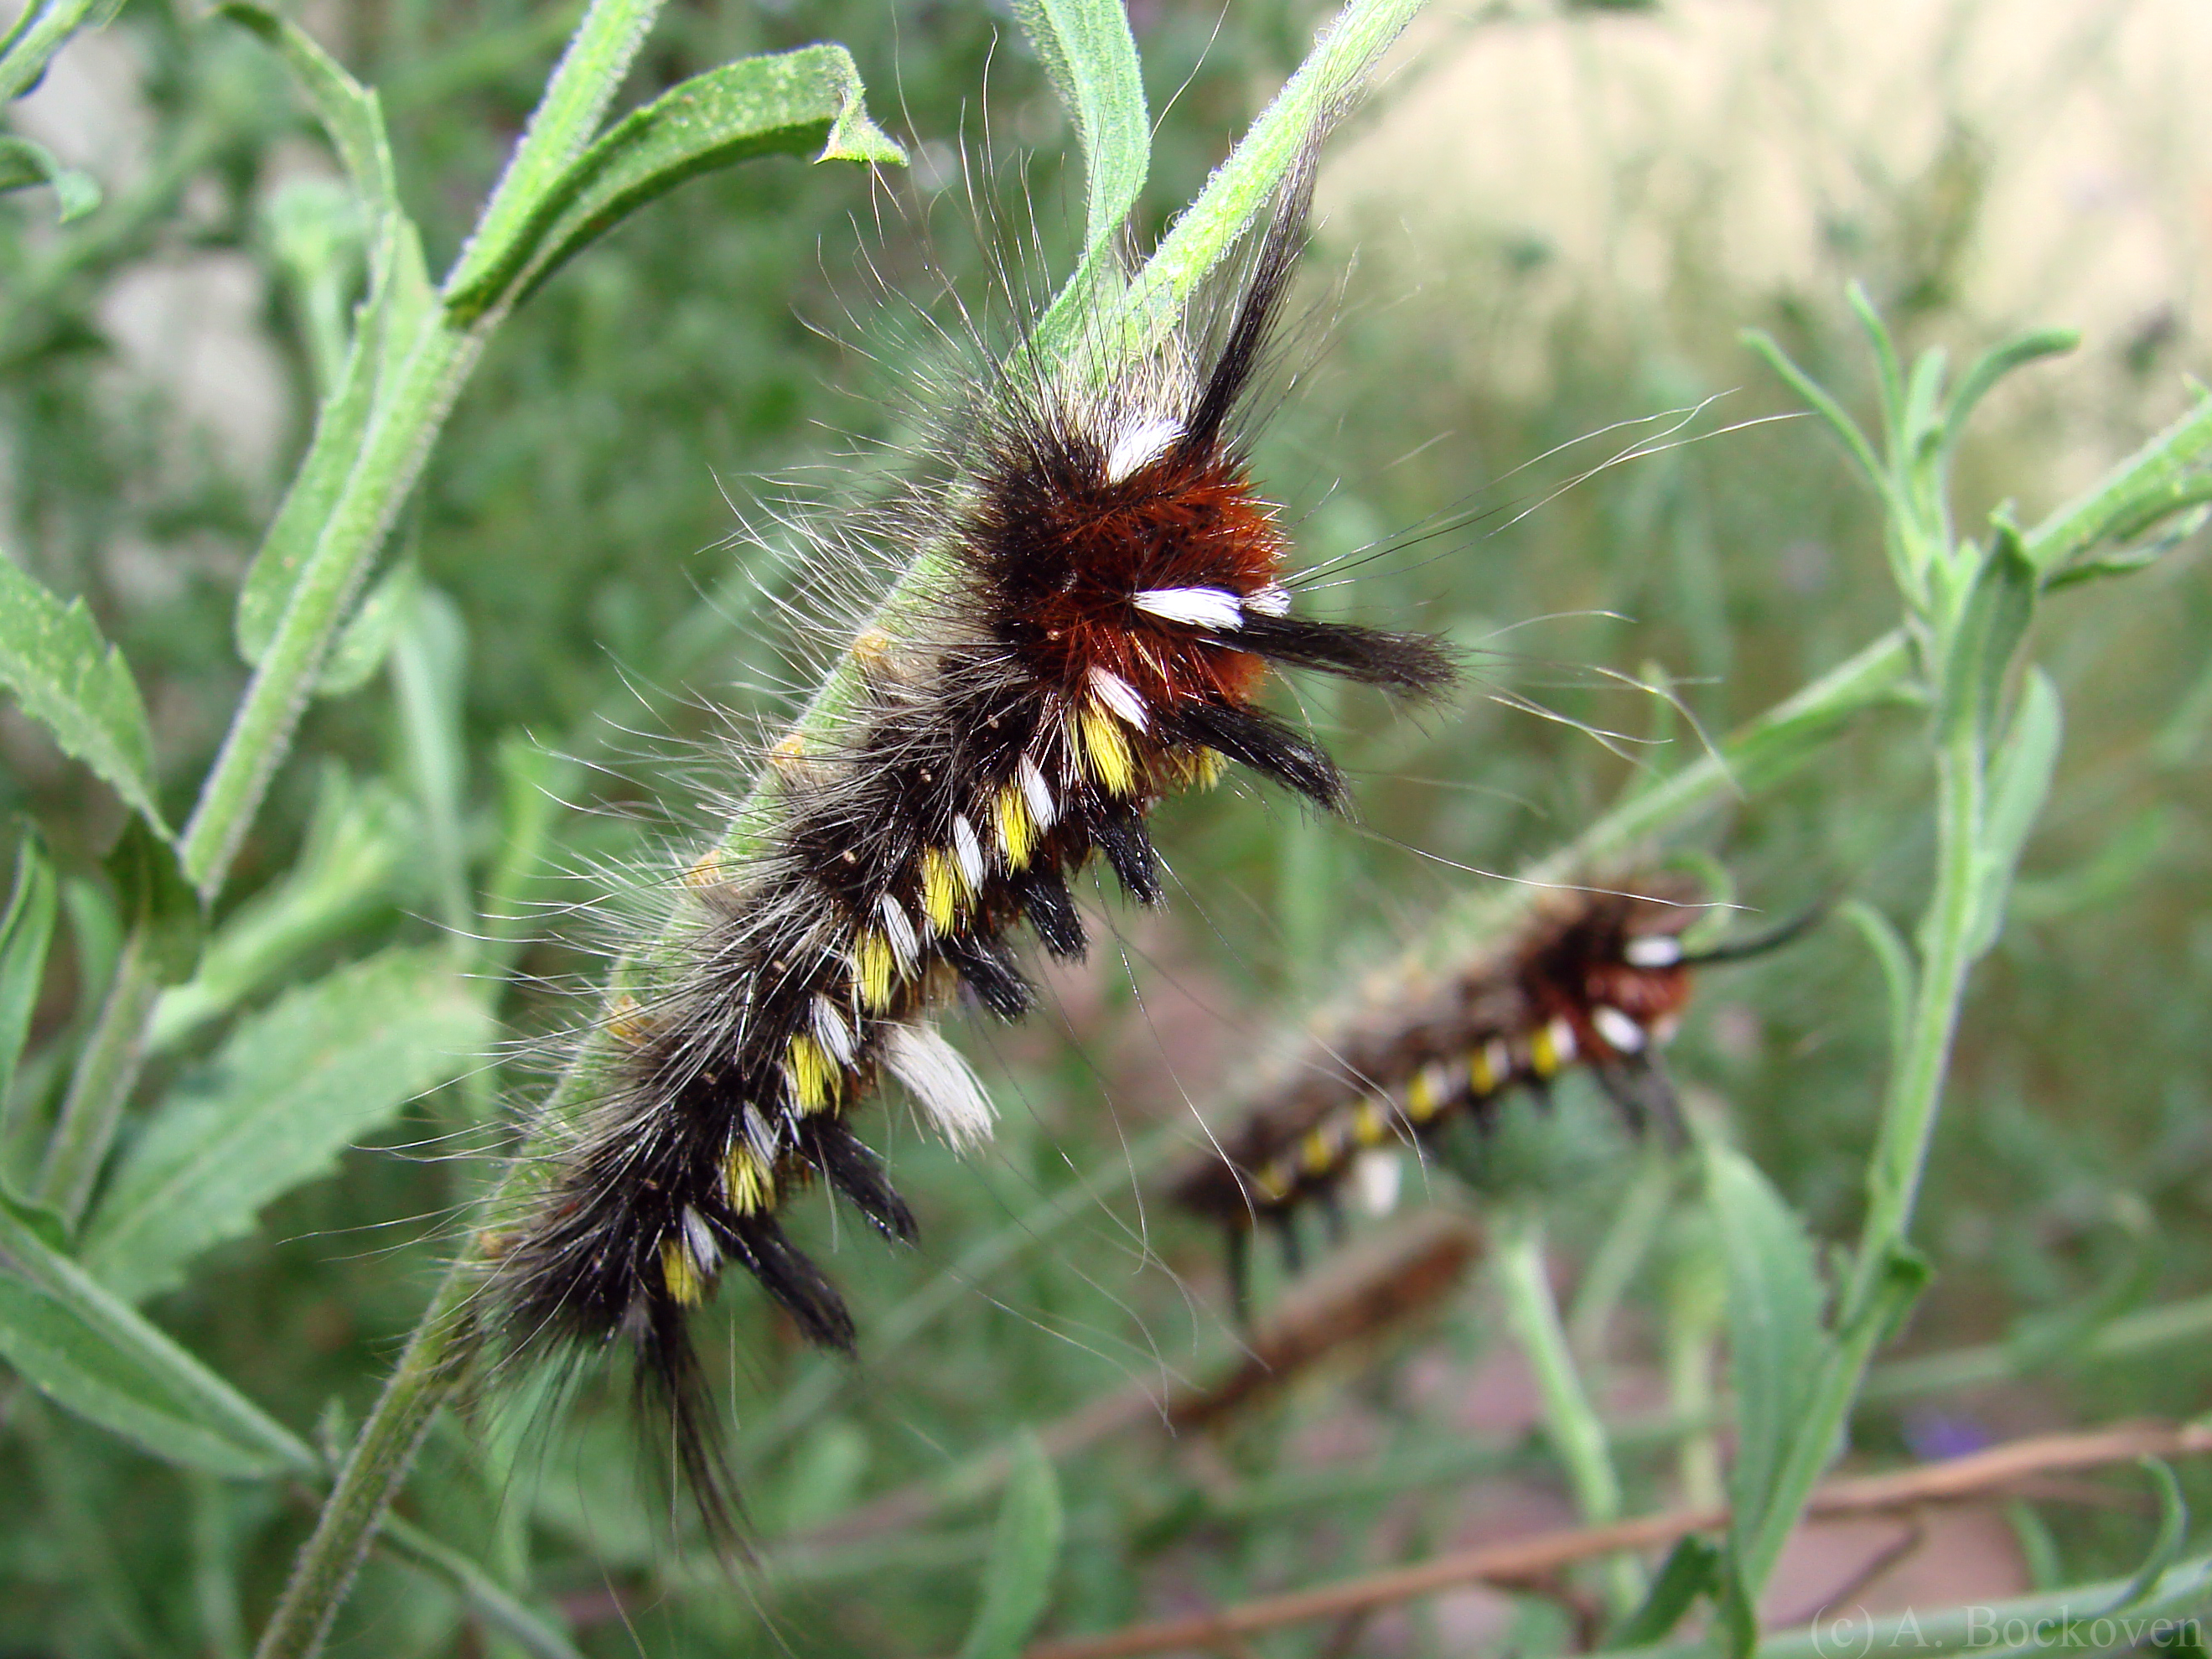 Fluffy Caterpillars and Latin Names | 6legs2many